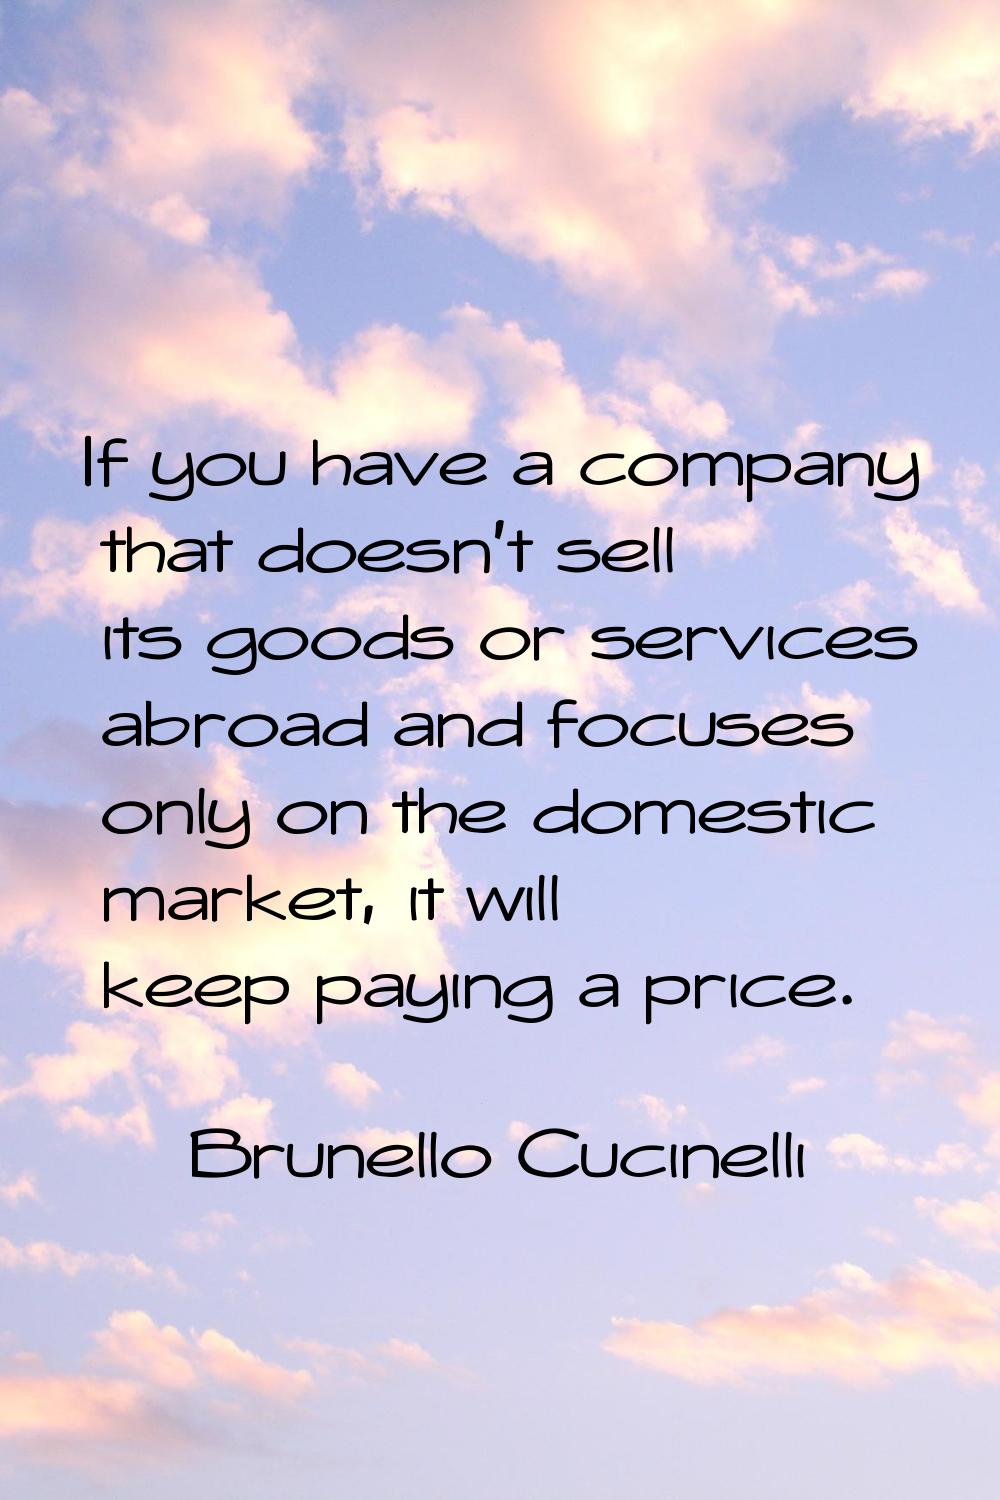 If you have a company that doesn't sell its goods or services abroad and focuses only on the domest